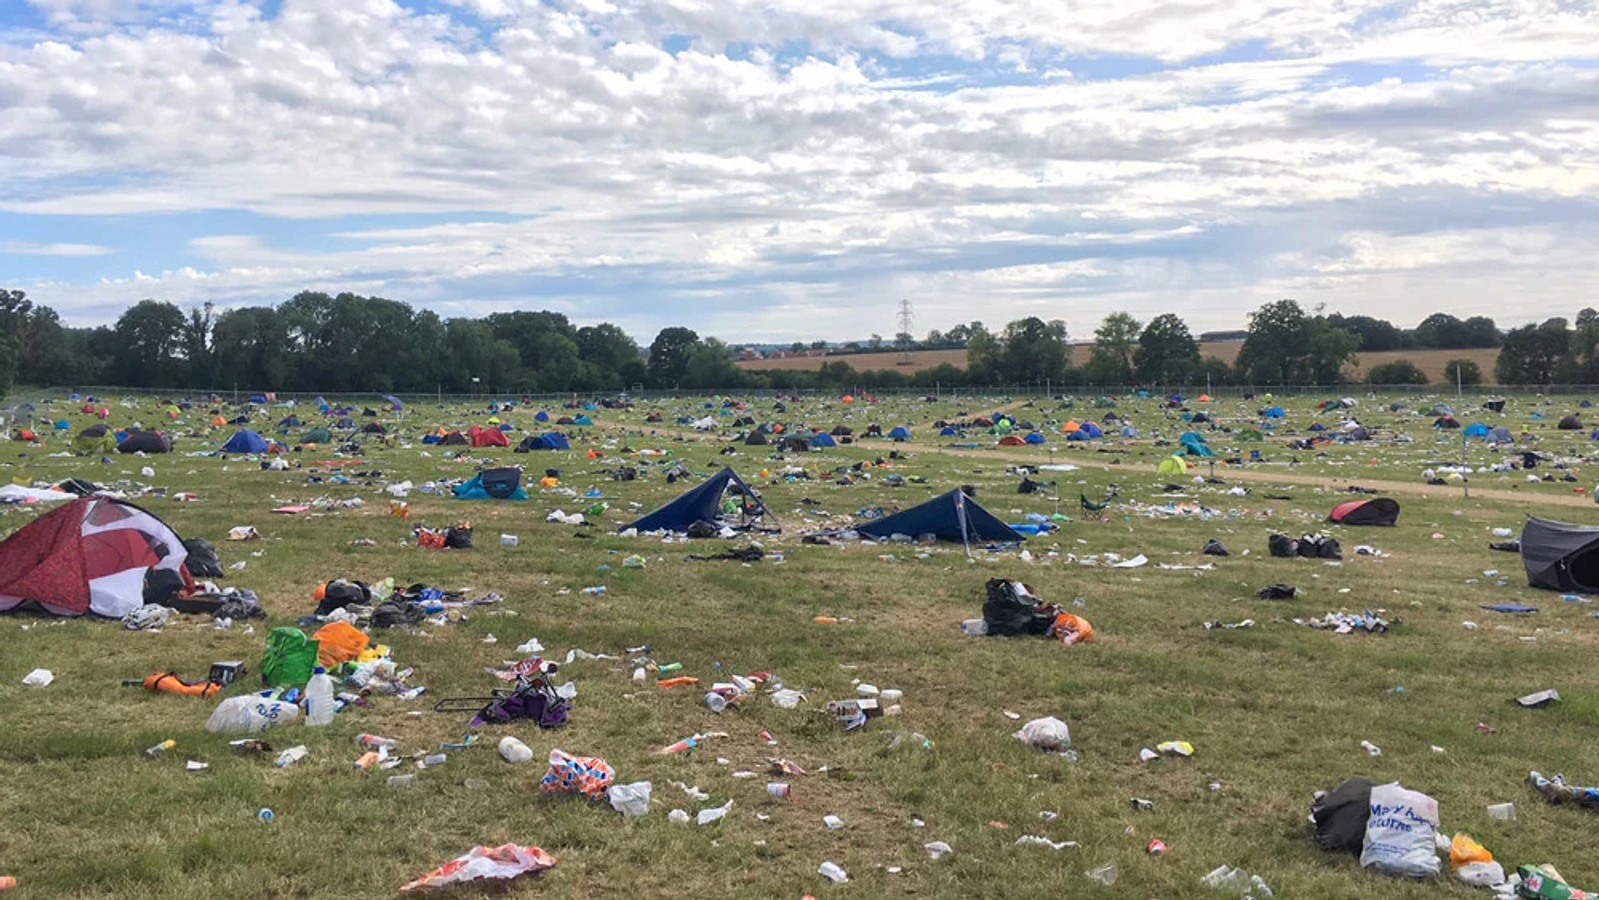 A field at the end of a festival, covered in plastic waste and discarded tents